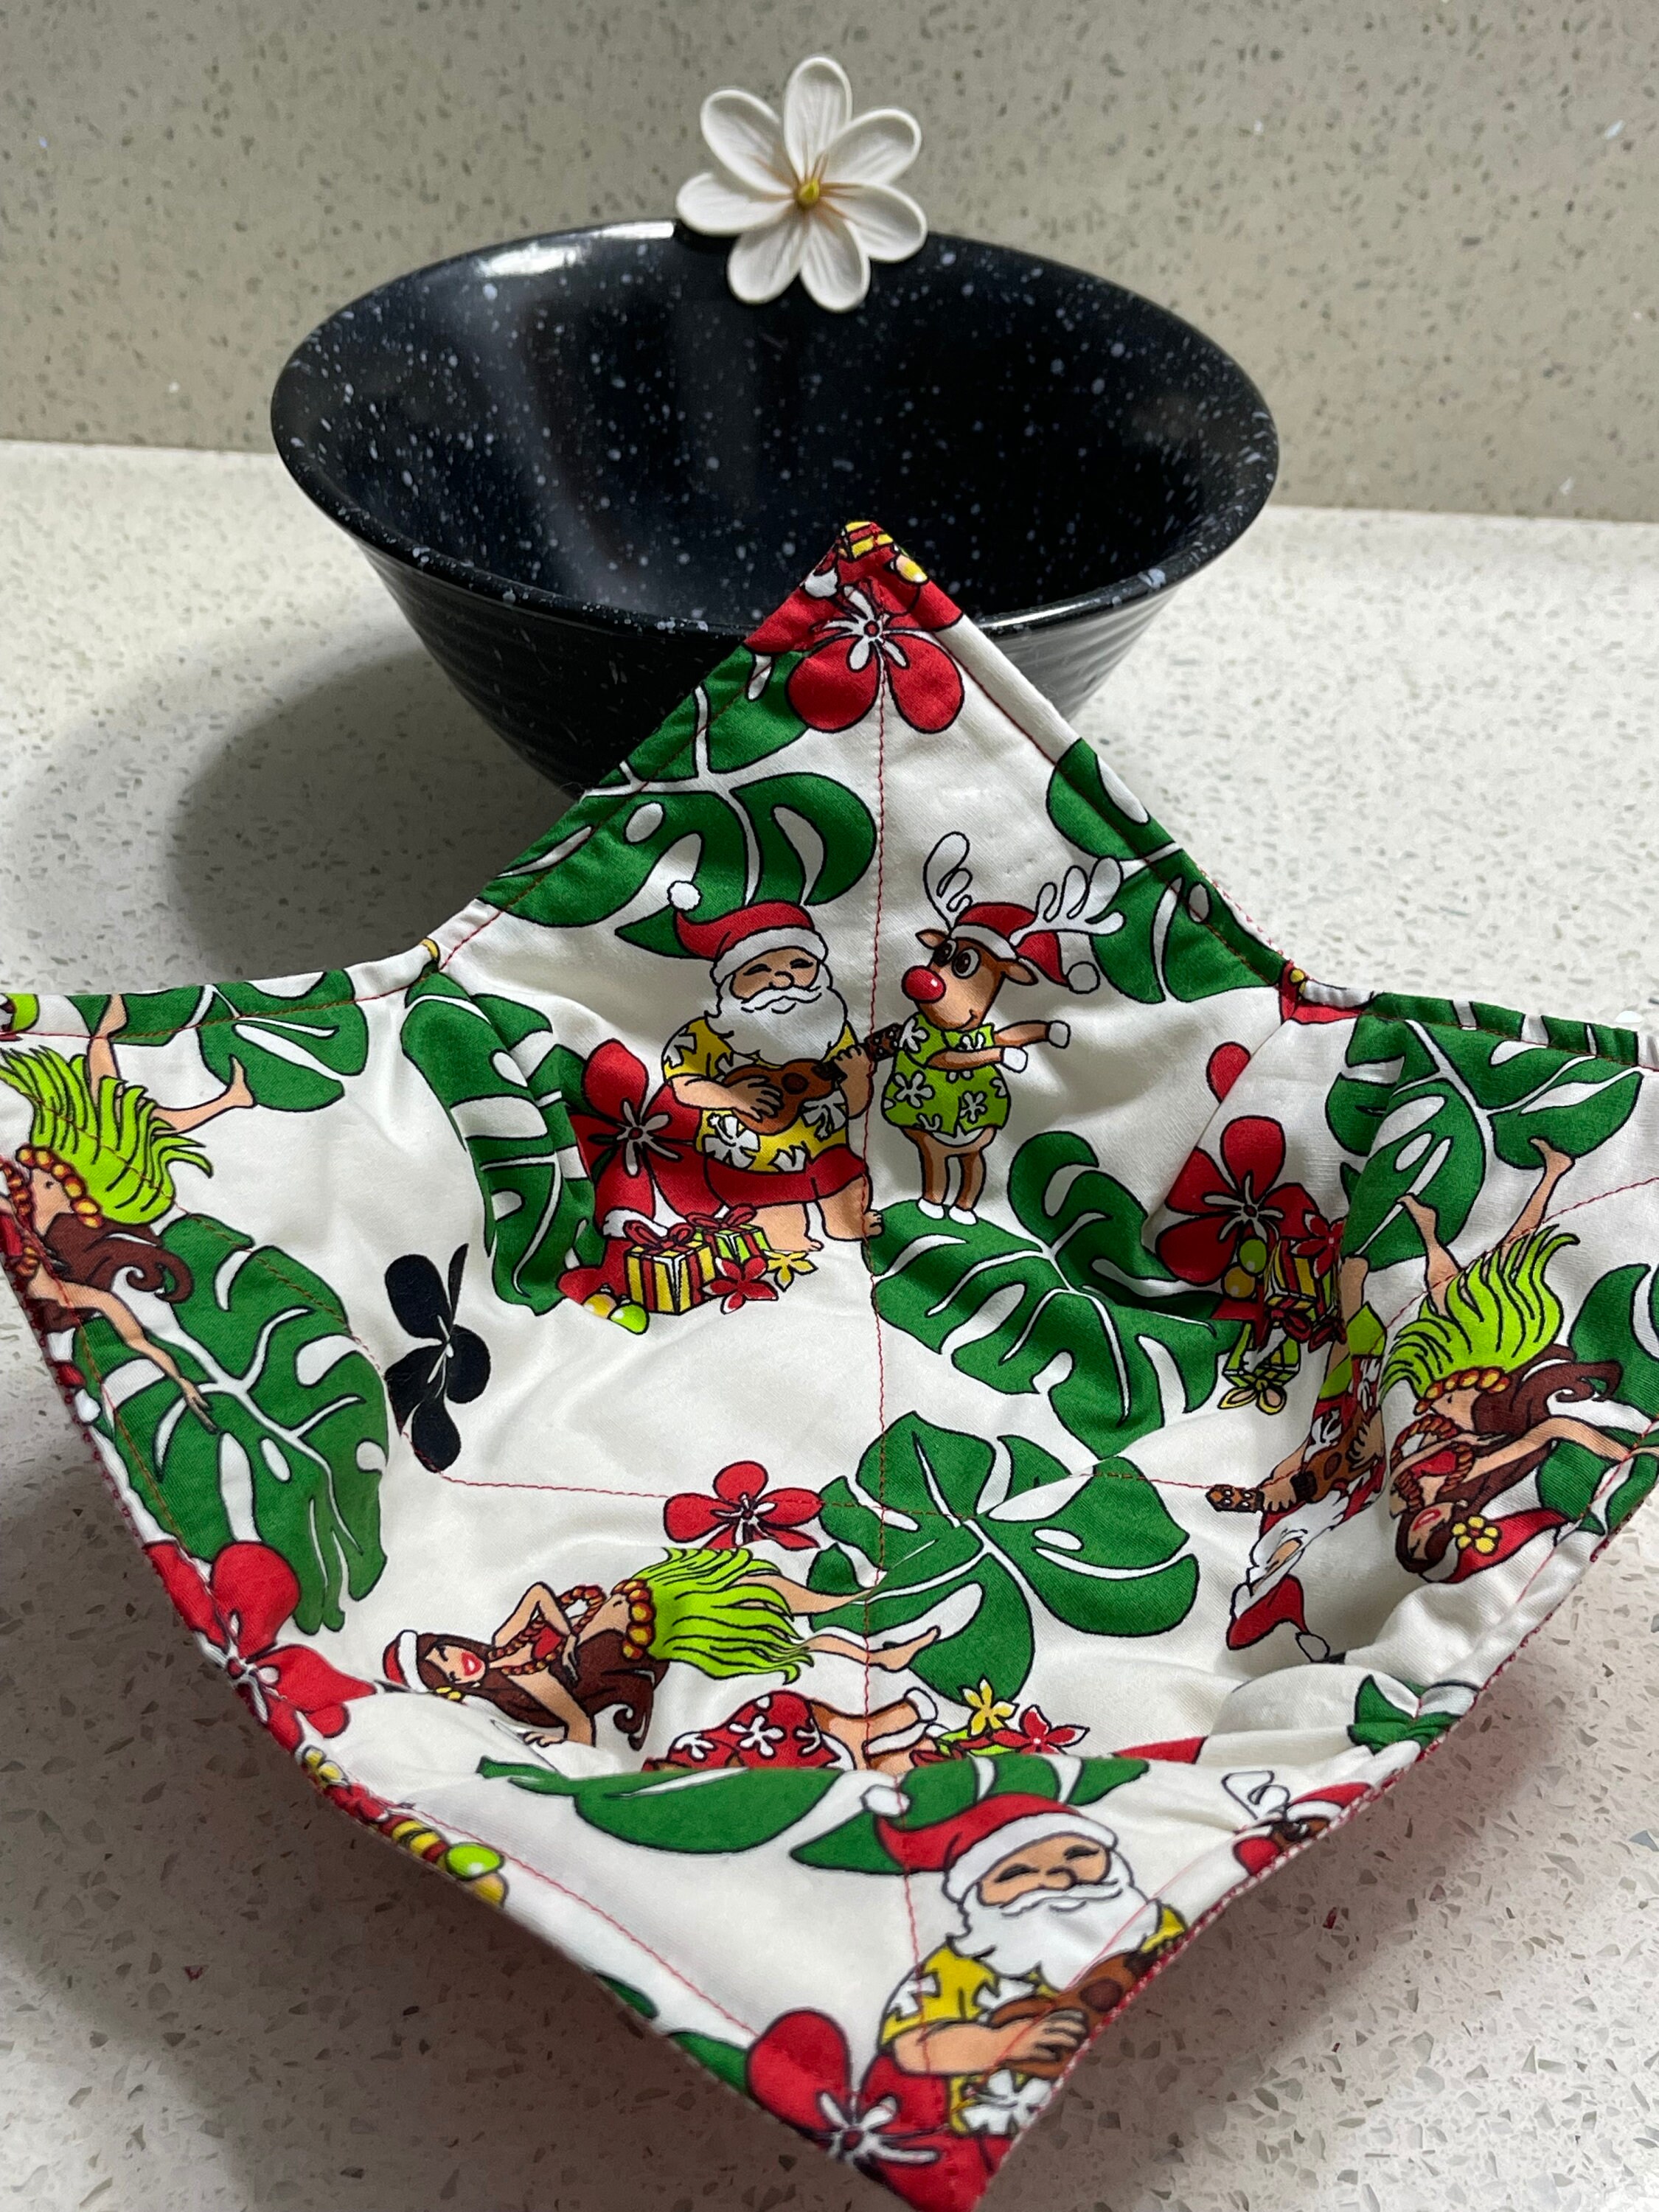 Hawaii State Public Library SystemSew a Bowl Cozy (for Microwave)